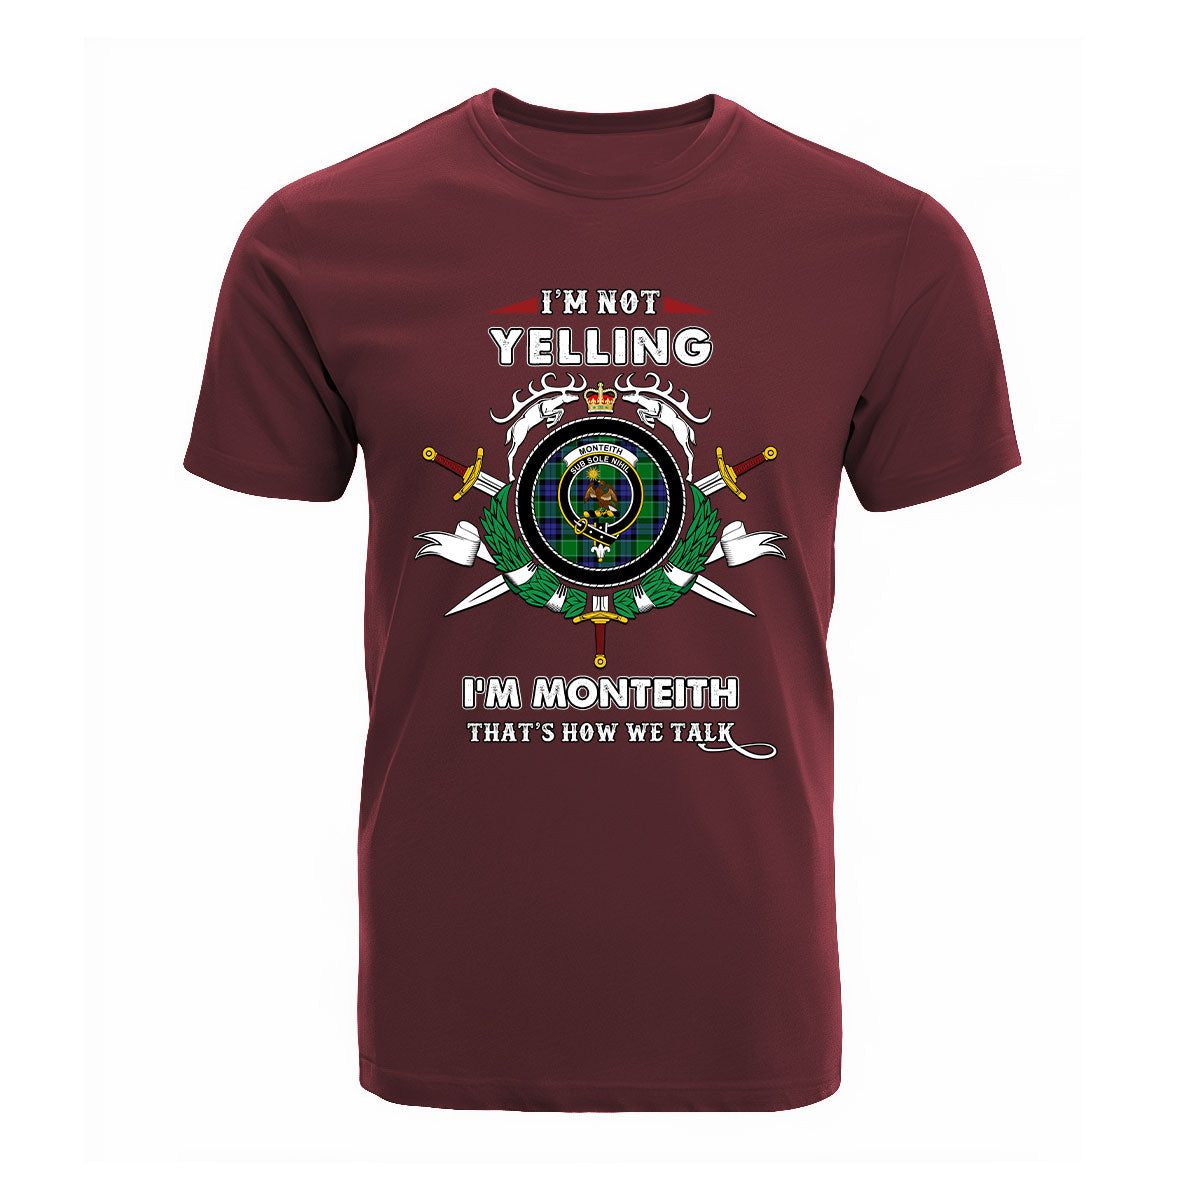 Monteith Tartan Crest T-shirt - I'm not yelling style